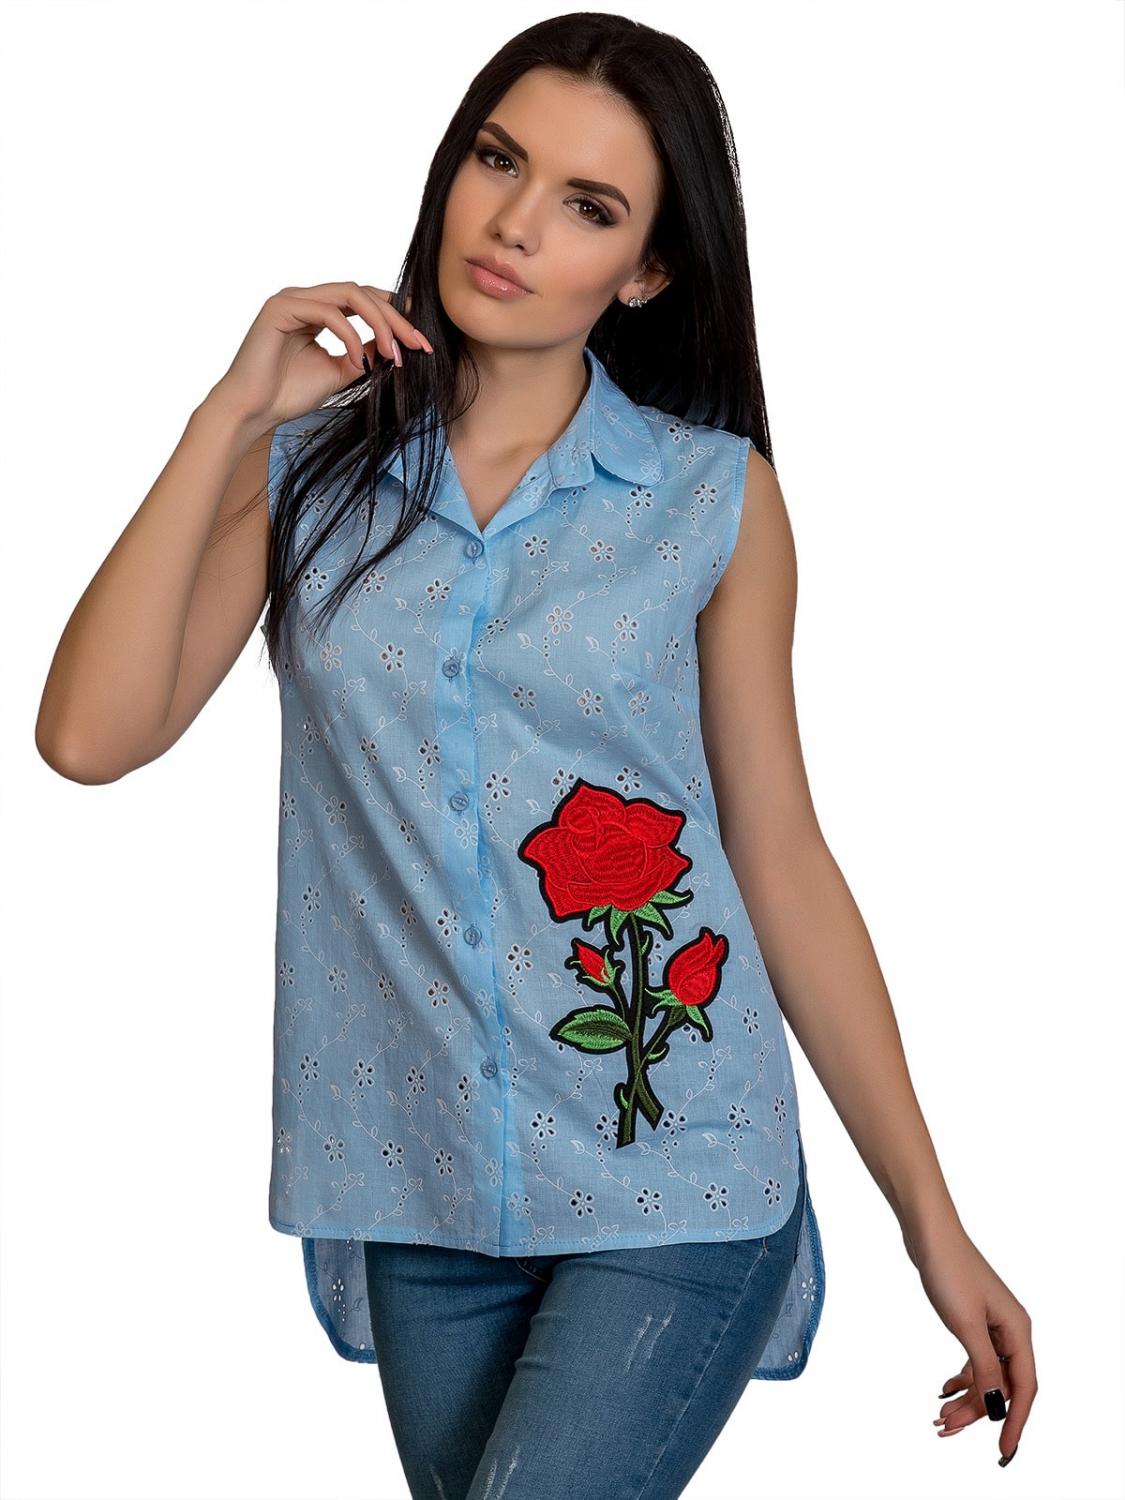 Women's shirt with a rose